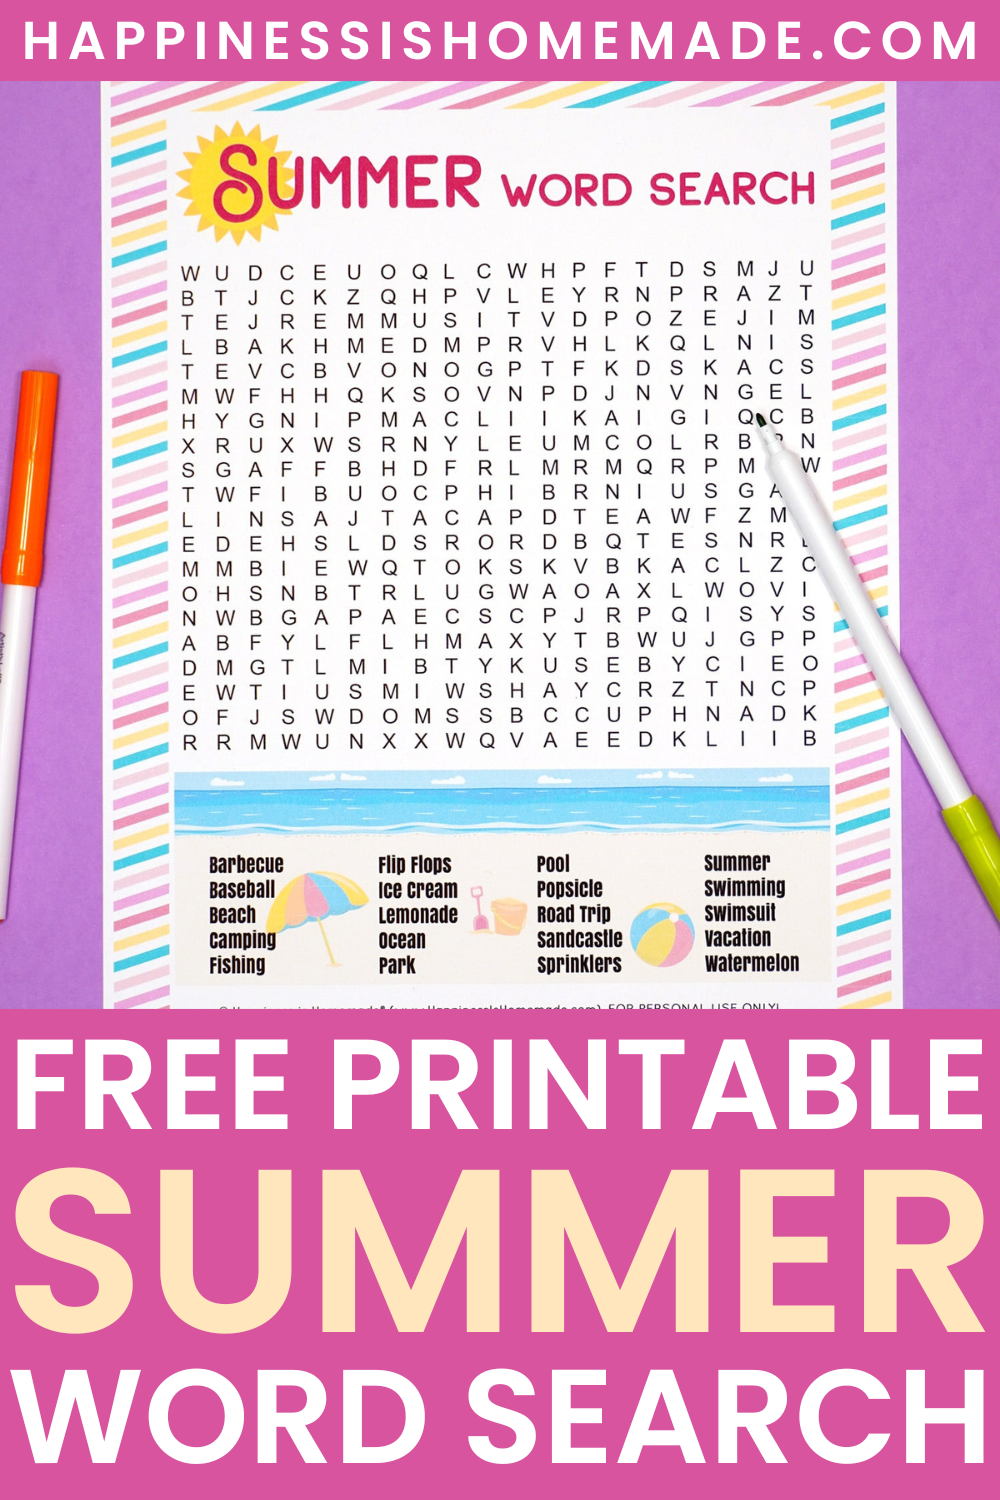 Free printable Summer Word Search